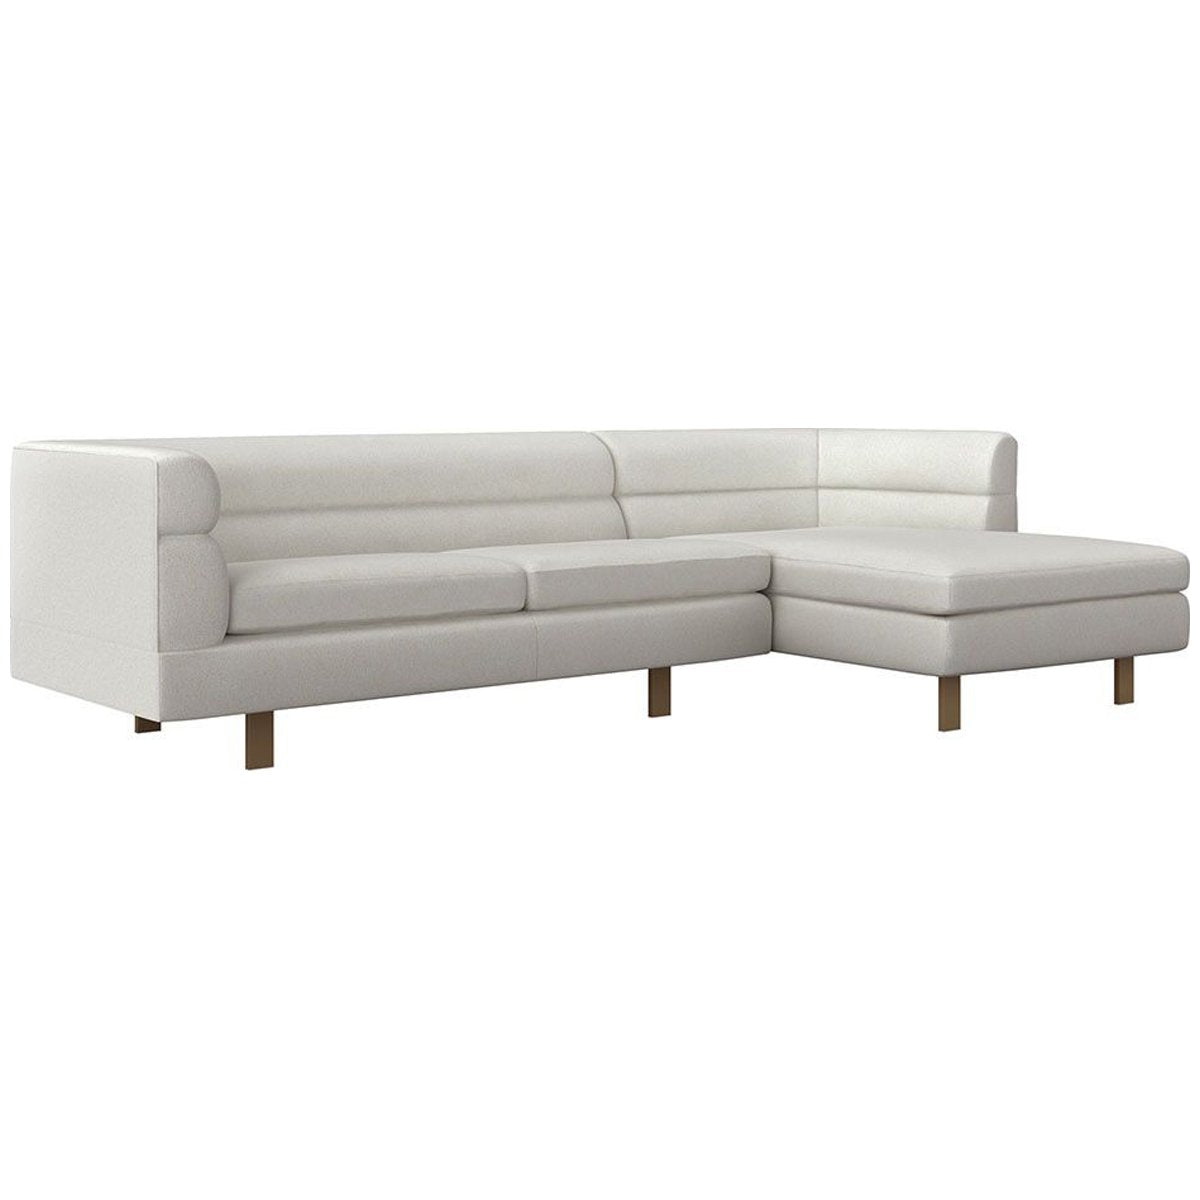 Interlude Home Ornette Chaise Sectional - Shearling